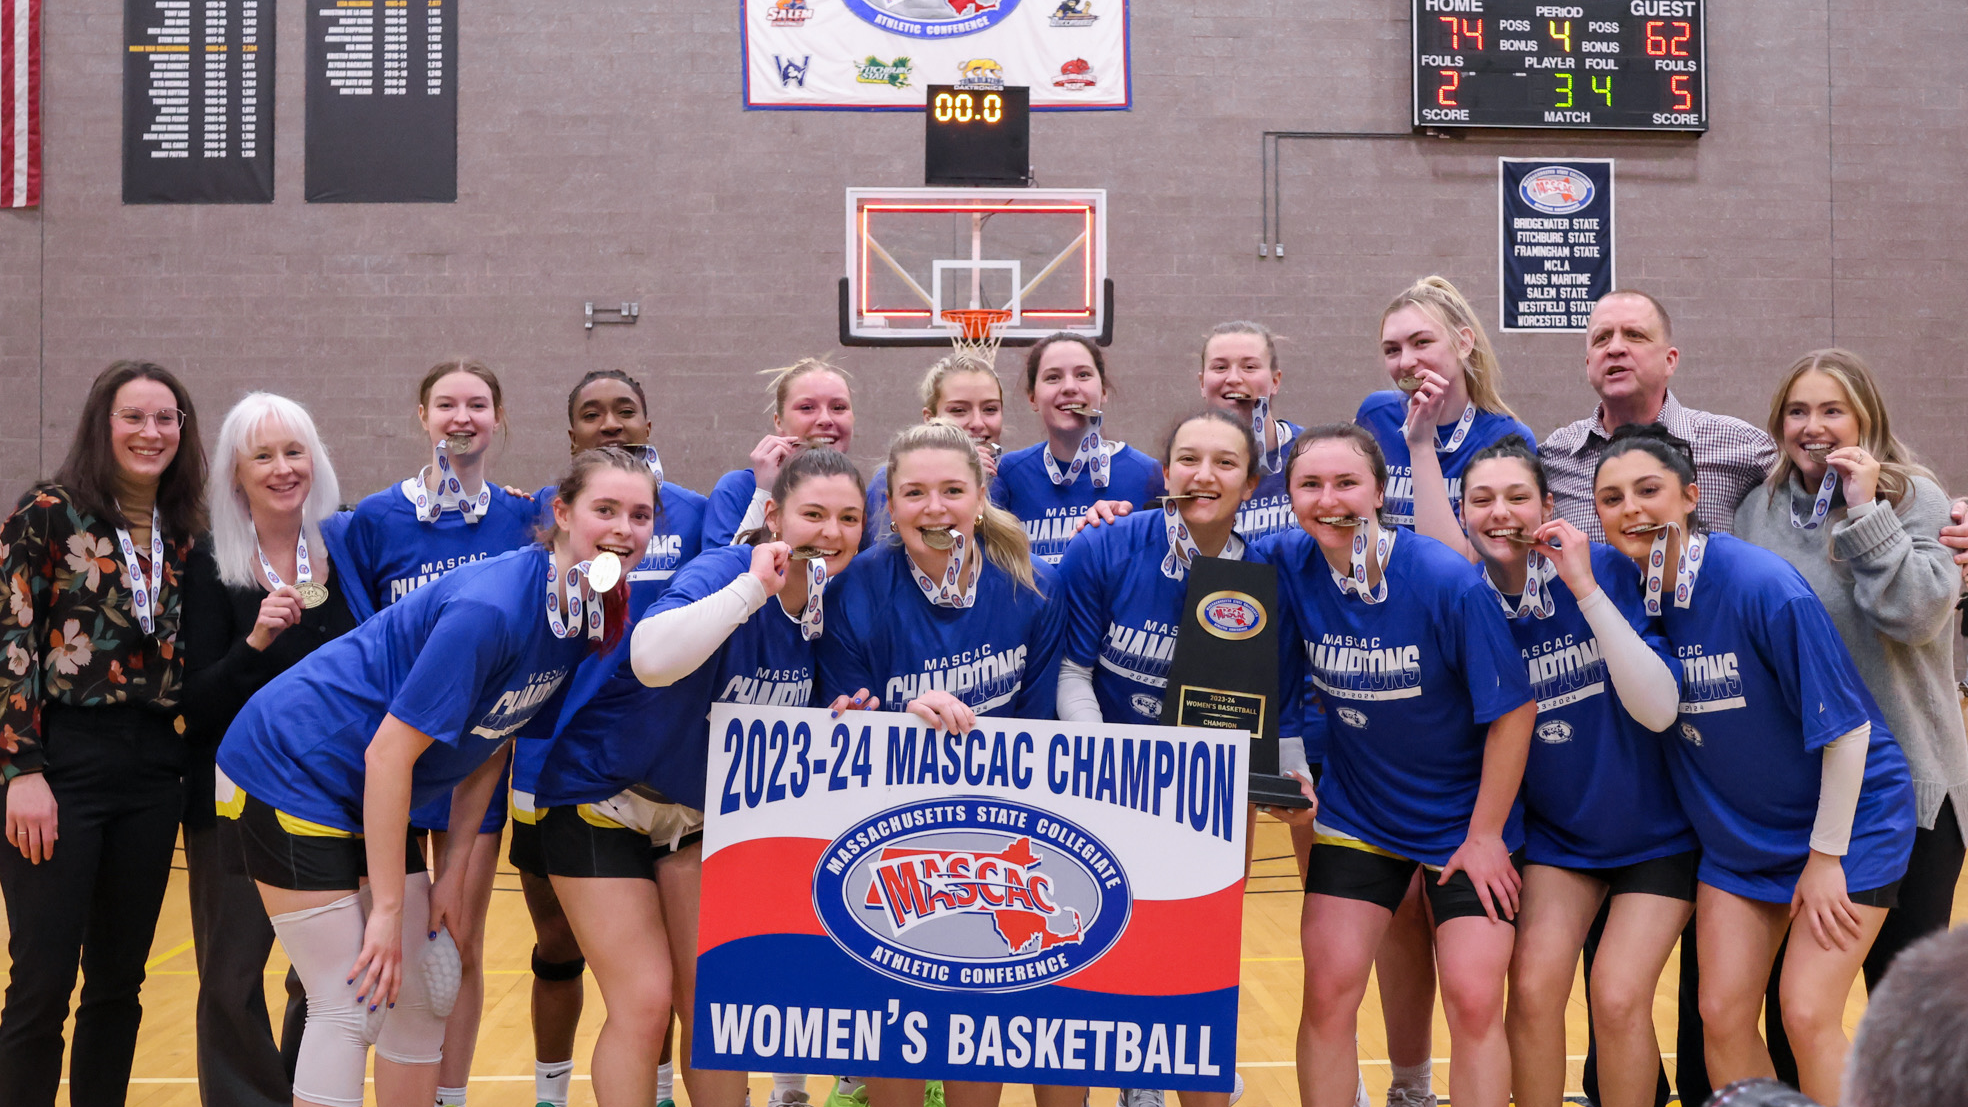 Women’s Basketball Captures Their Third MASCAC Championship in Four Seasons with 74-62 Win Over Bridgewater State